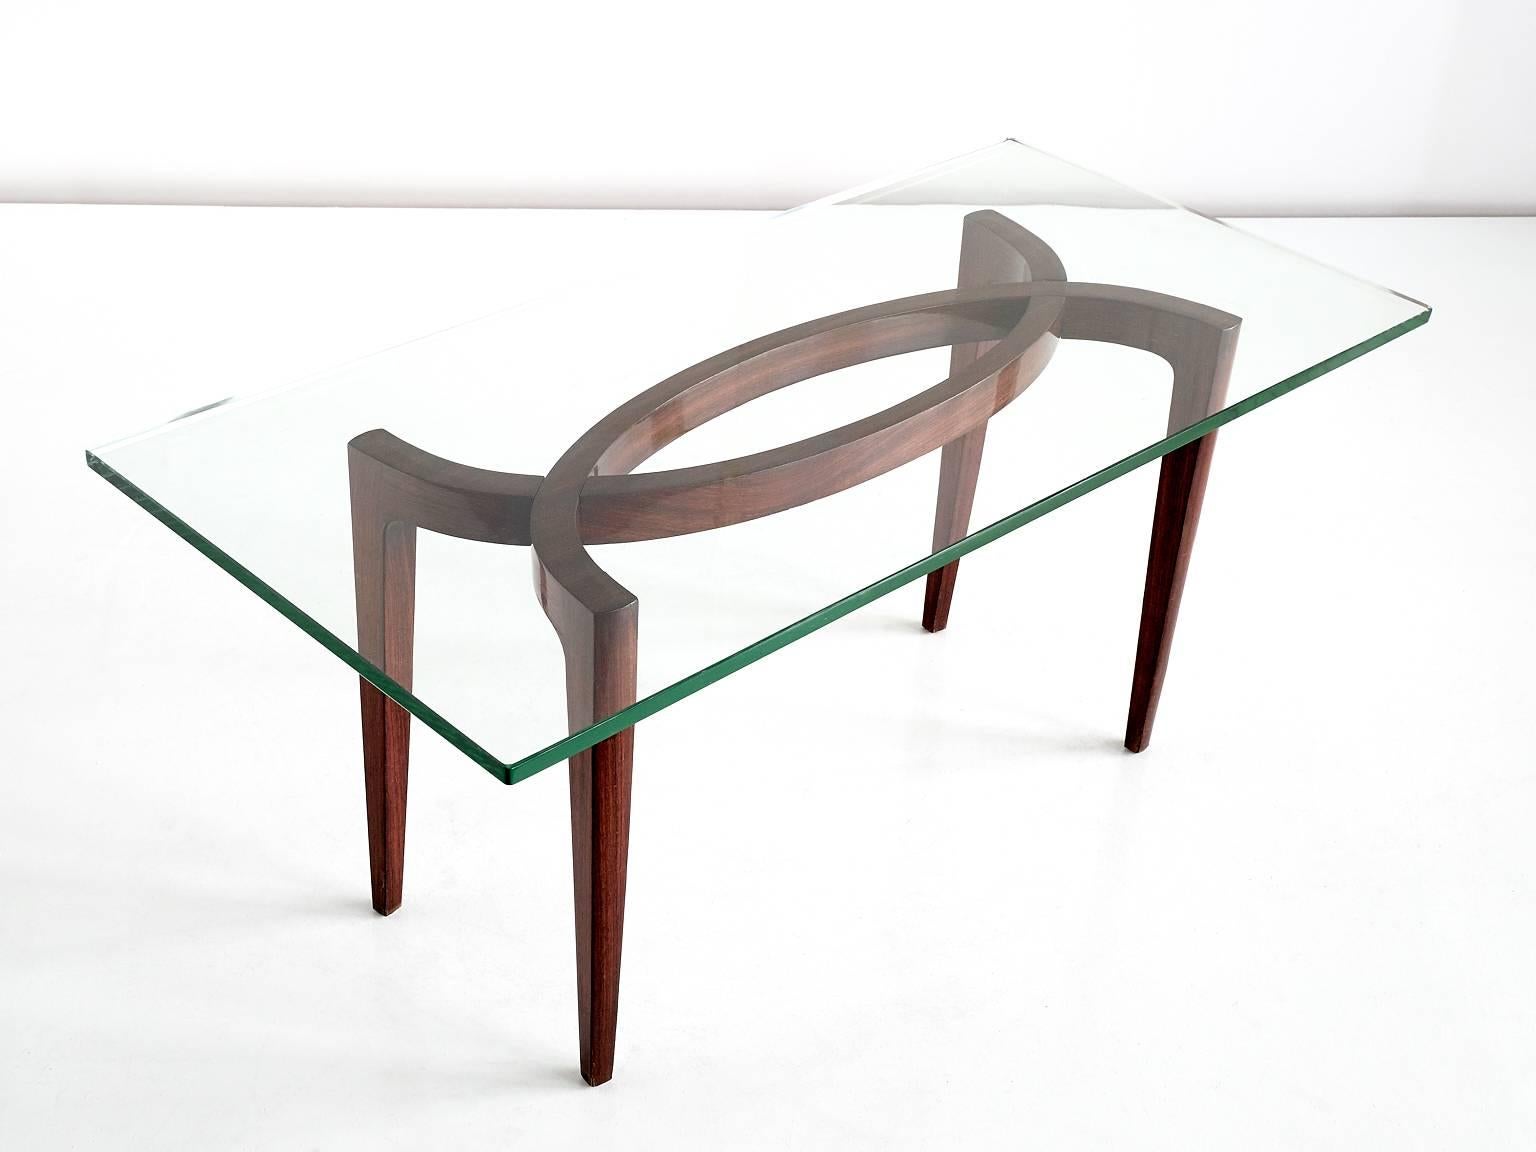 This rare rectangular table was designed by Carlo Enrico Rava in the late 1940s. The Italian glass top is resting on a rosewood-veneered frame. The sculptural shape of the frame makes this a striking and elegant design.
Due to its dimensions, the